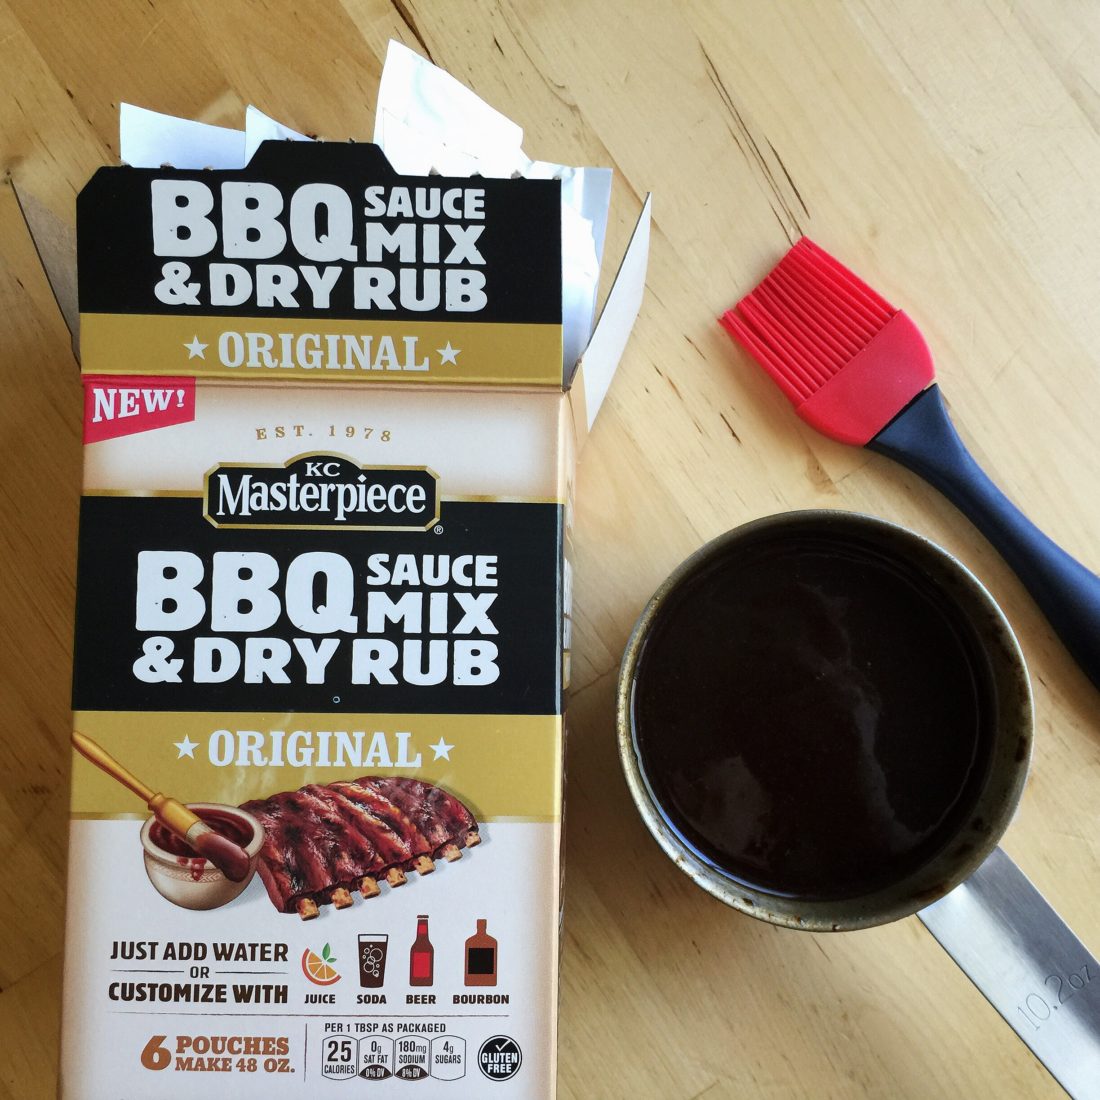 Grill Recipe With Bacon Cheddar Burgers And Coffee BBQ Sauce © www.roastedbeanz.com #BestSummerBBQ [AD] #CollectiveBias #shop